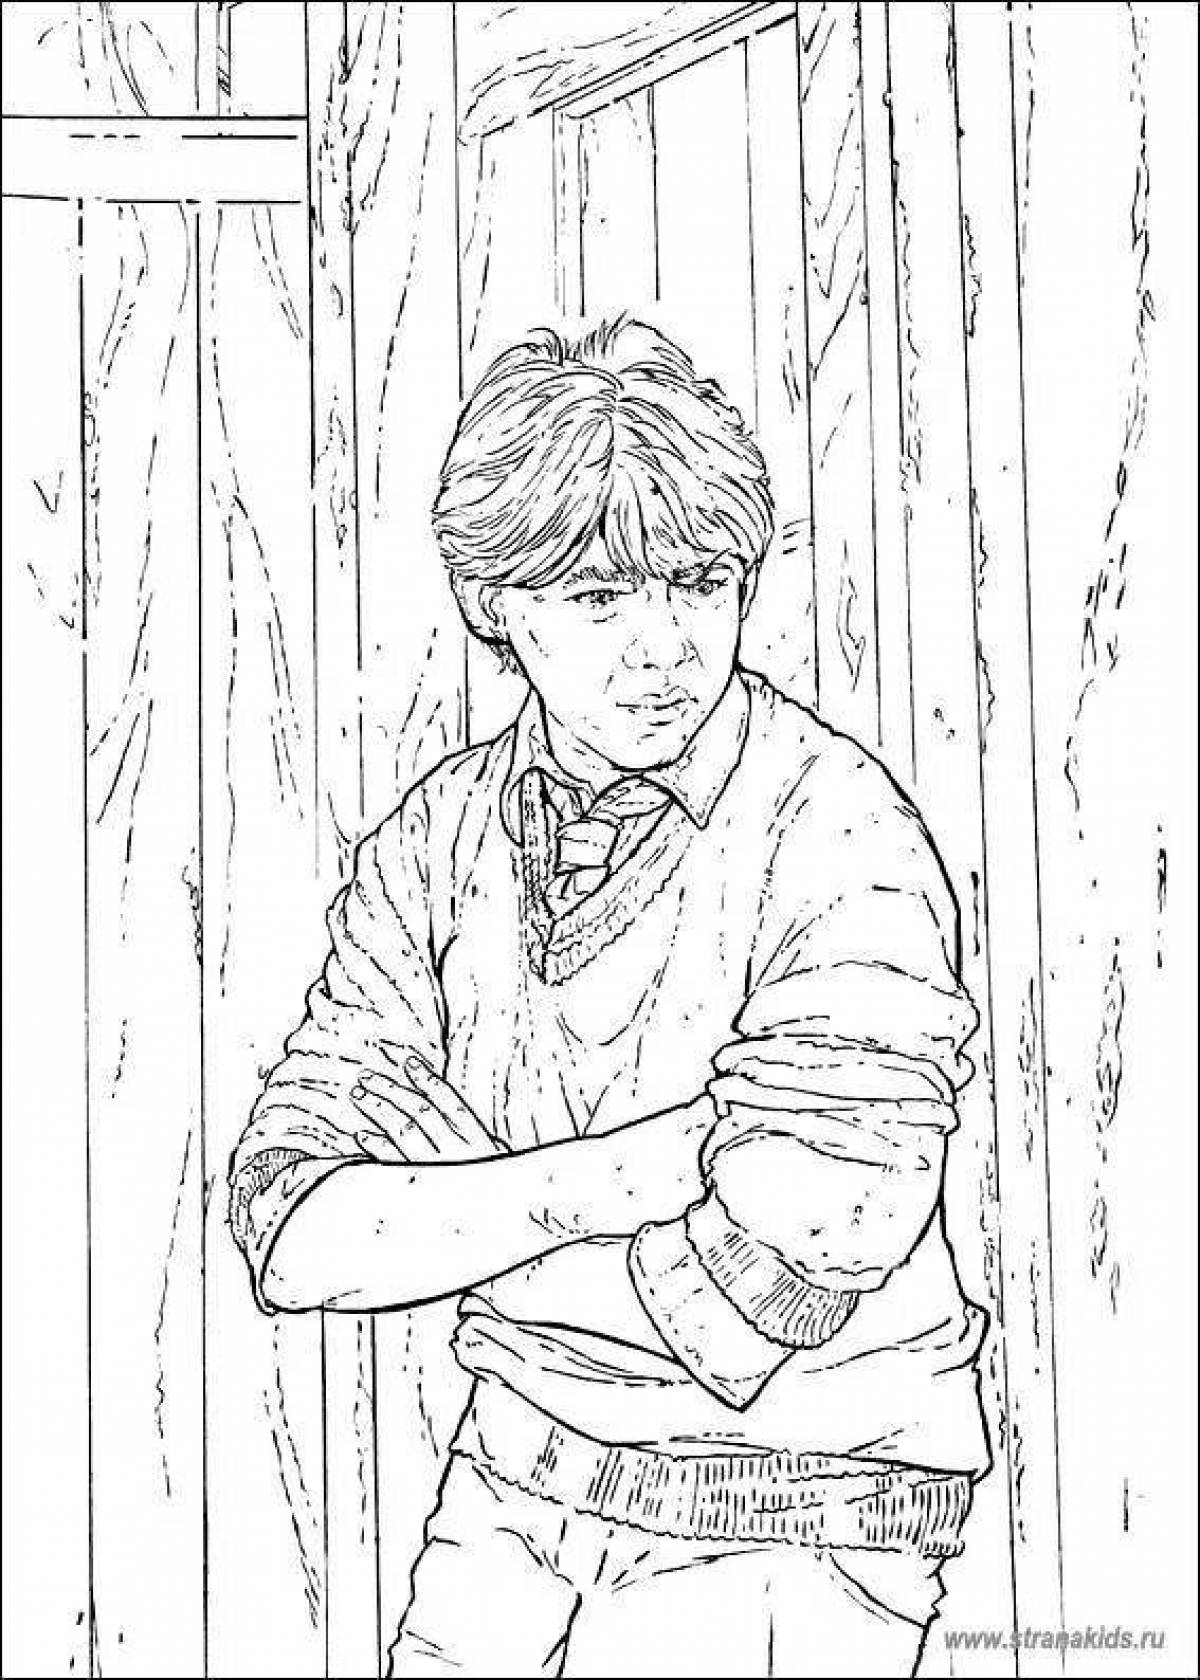 Ron Weasley's charming coloring book